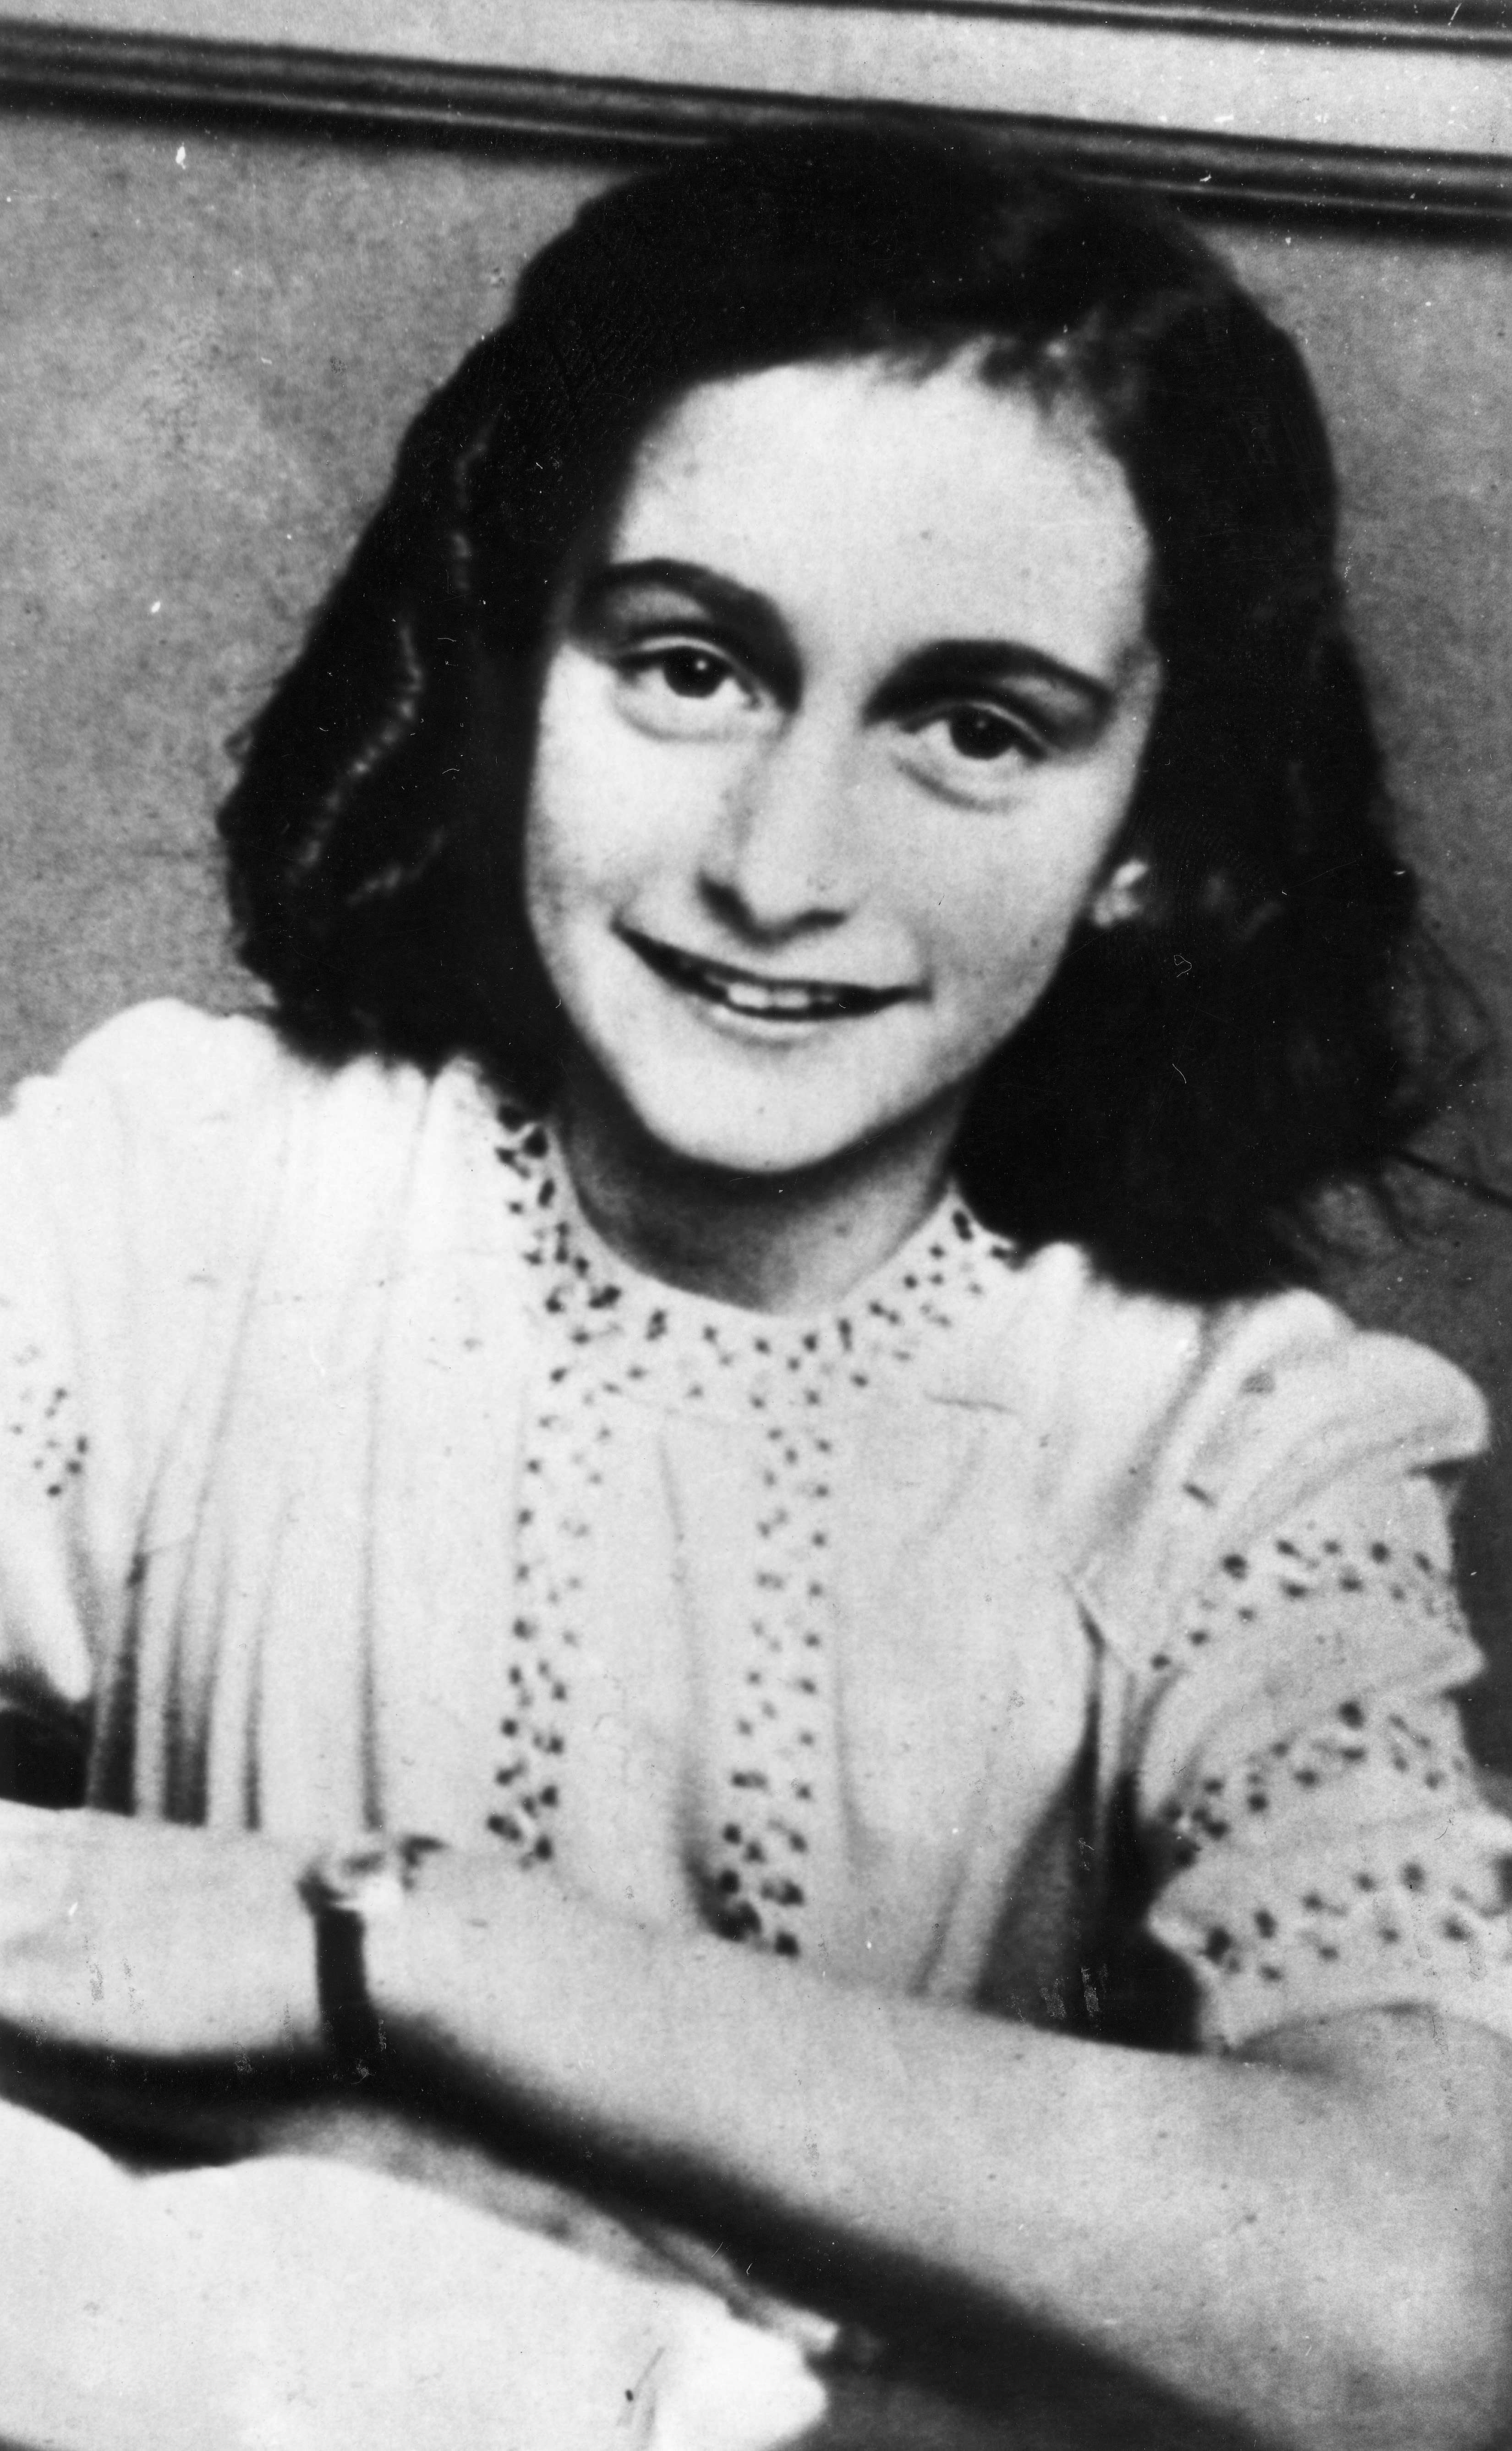 The Diary of Anne Frank: New App Publishes Story | Time